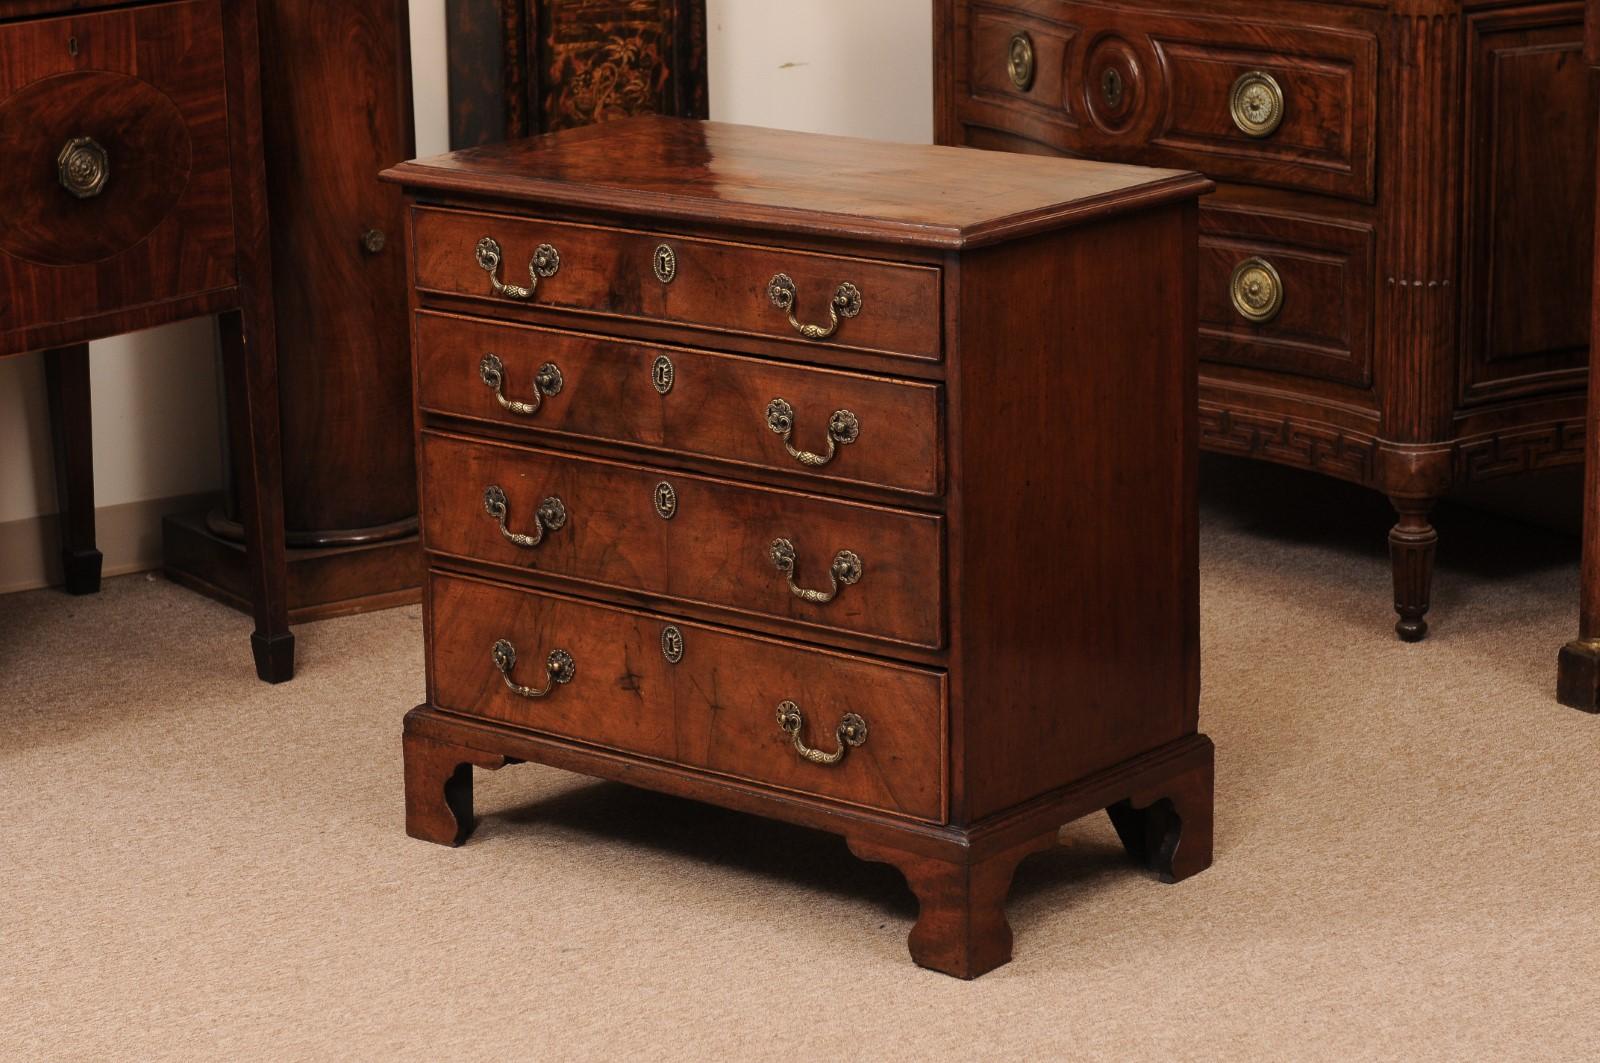 Small 18th Century English Mahogany Bachelor’s Chest with 4 Drawers and Bracket For Sale 7